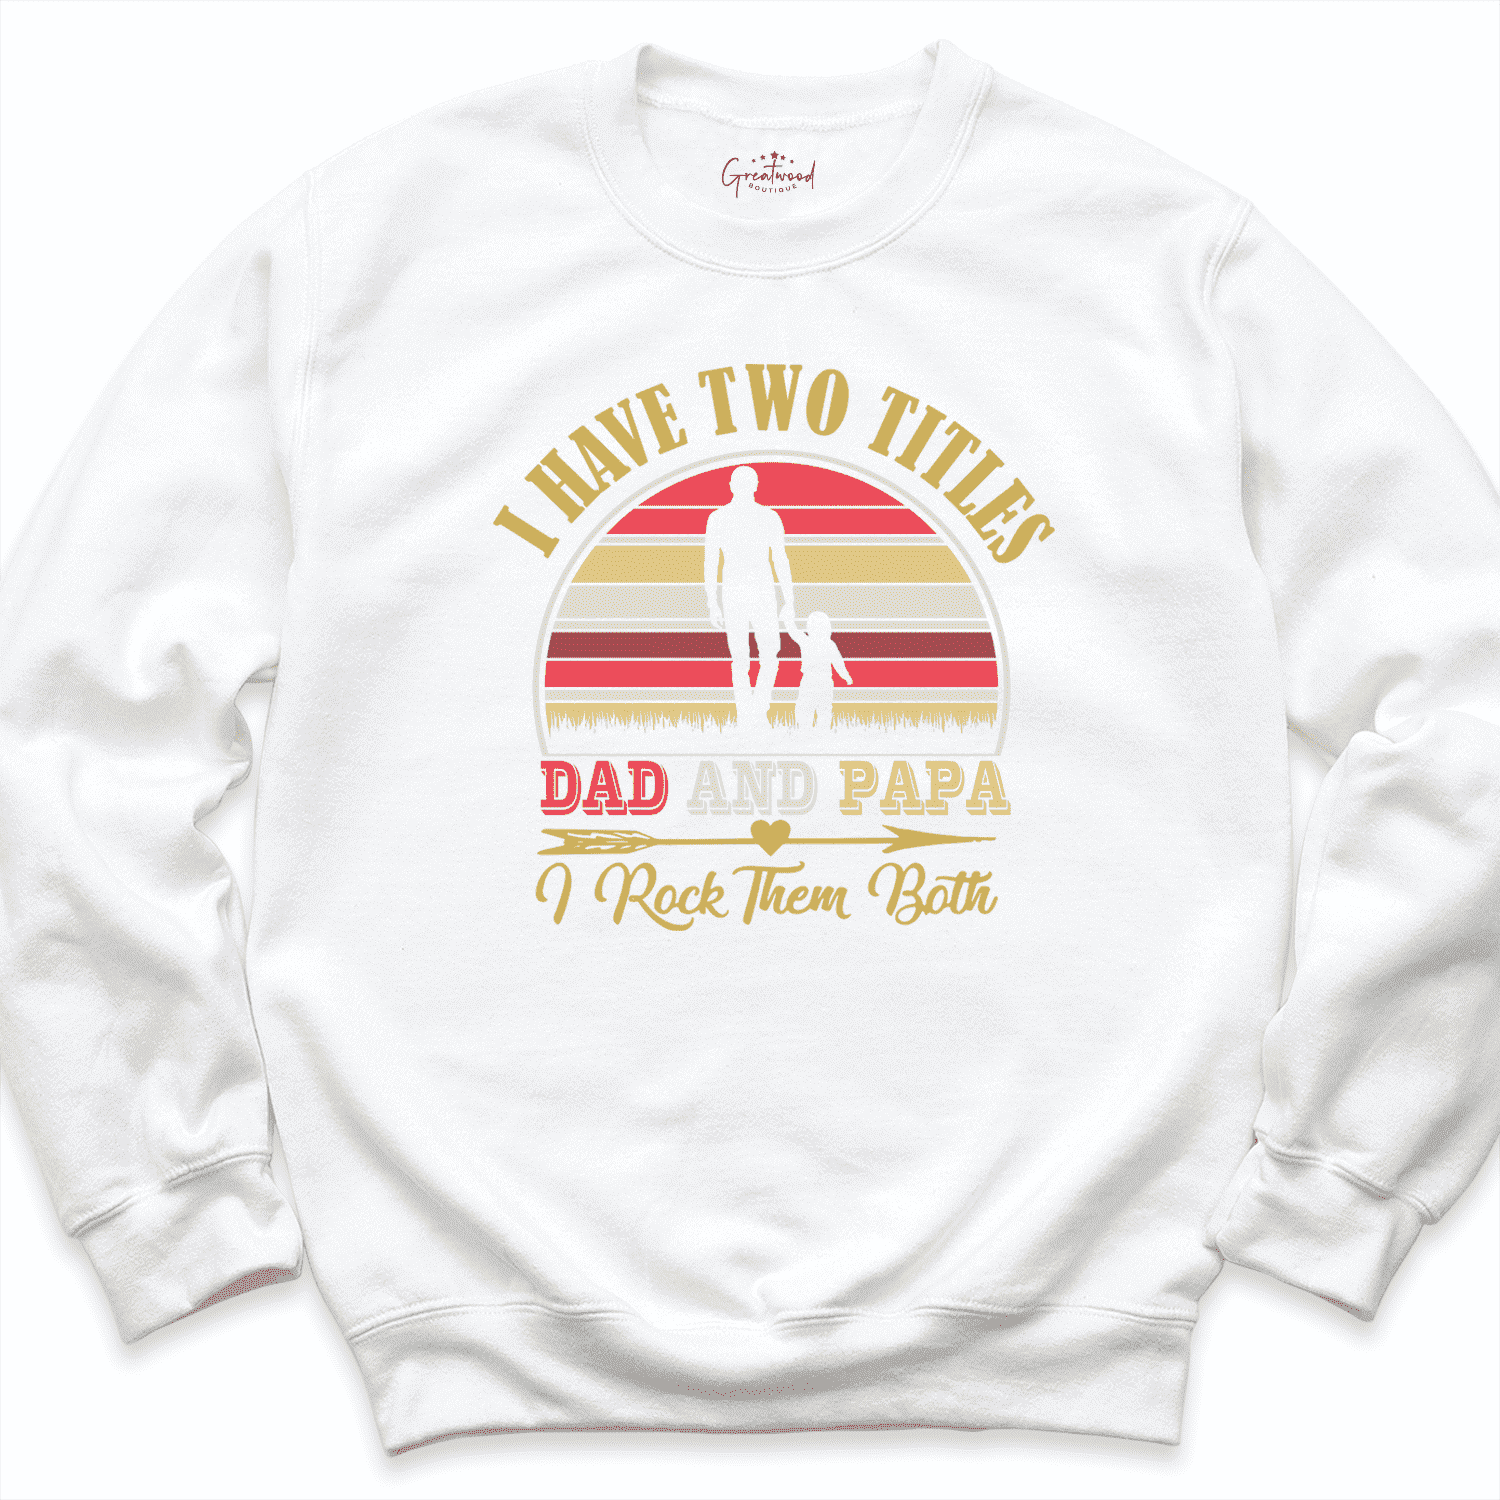 Dad and Papa Sweatshirt White - Greatwood Boutique